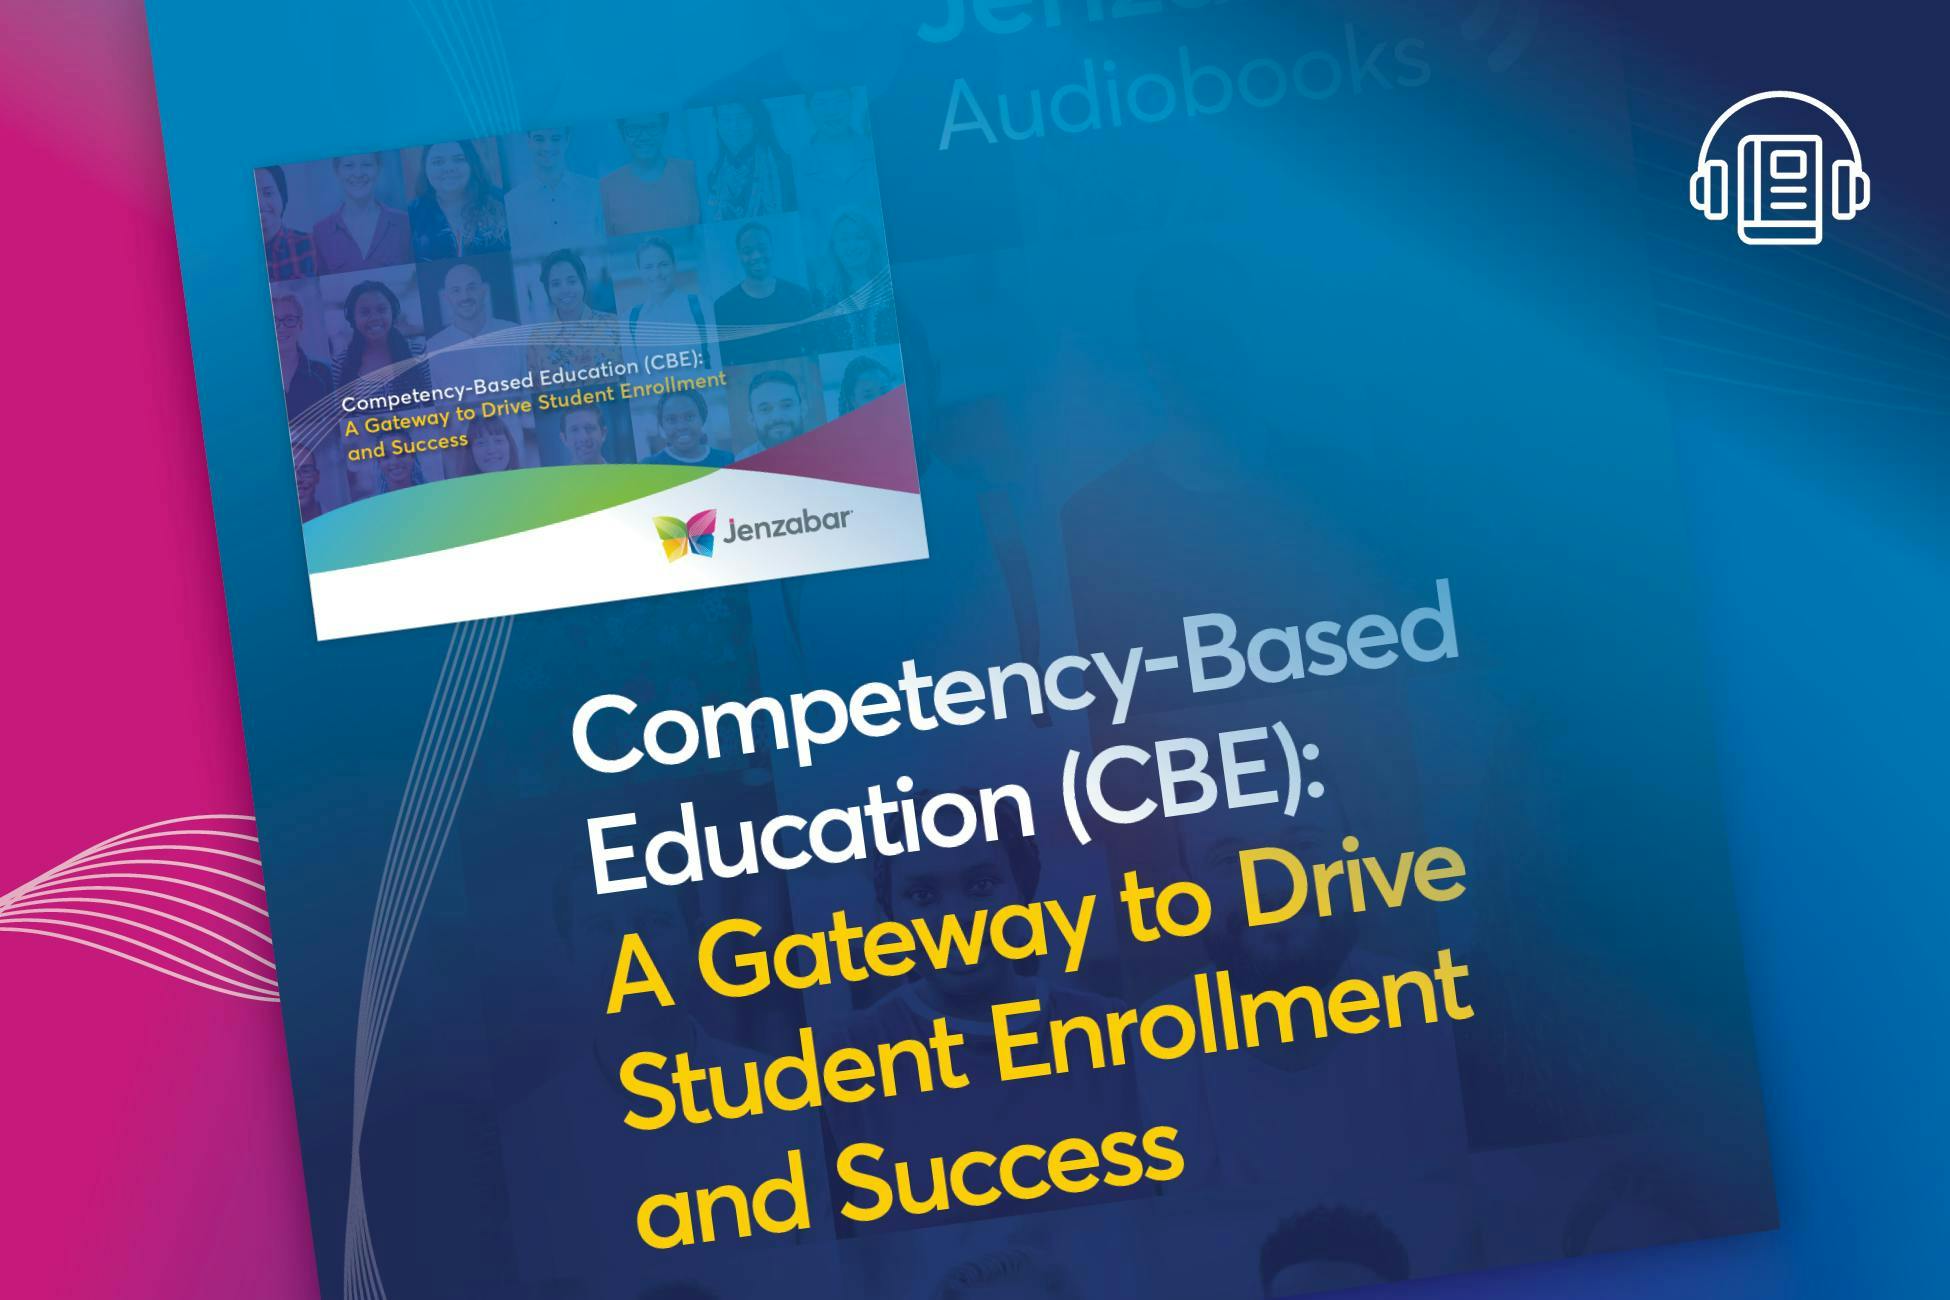 Audiobook: How Competency-Based Education Can Help Attract New Students and Ensure Their Success